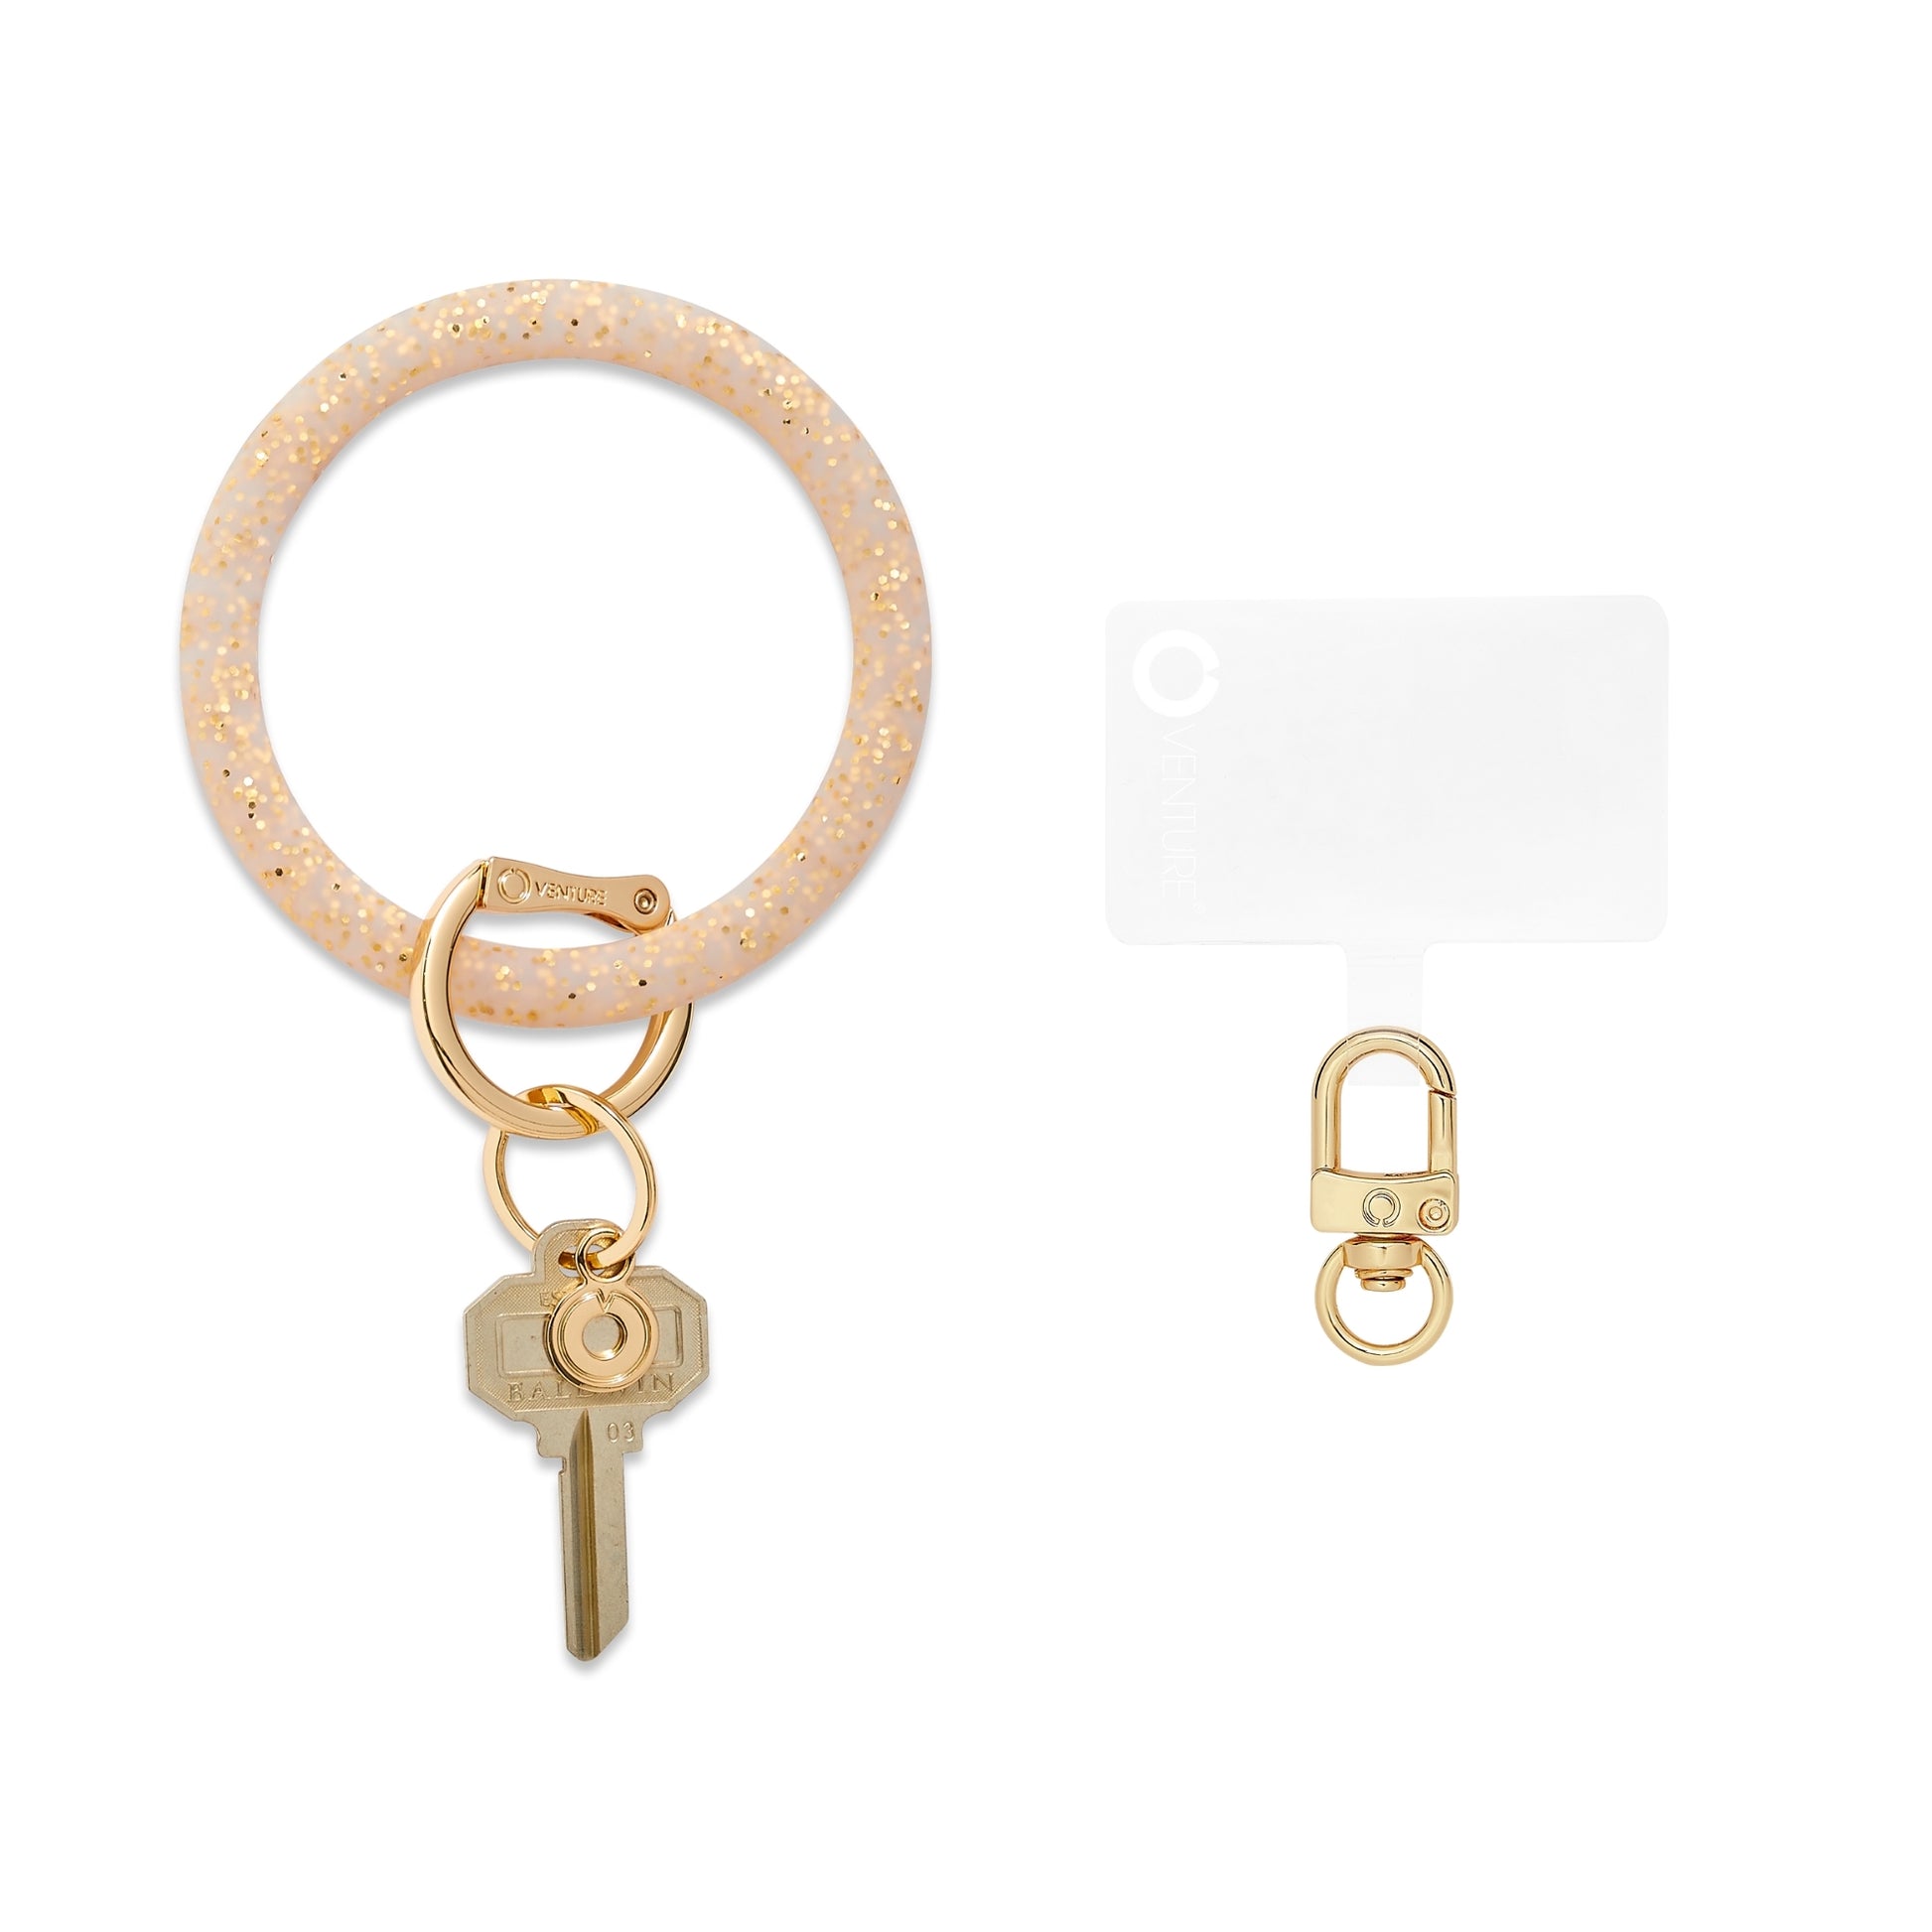 Gold Rush Big O Key Ring and Hook Me Up Phone Connector Oventure  Edit alt text